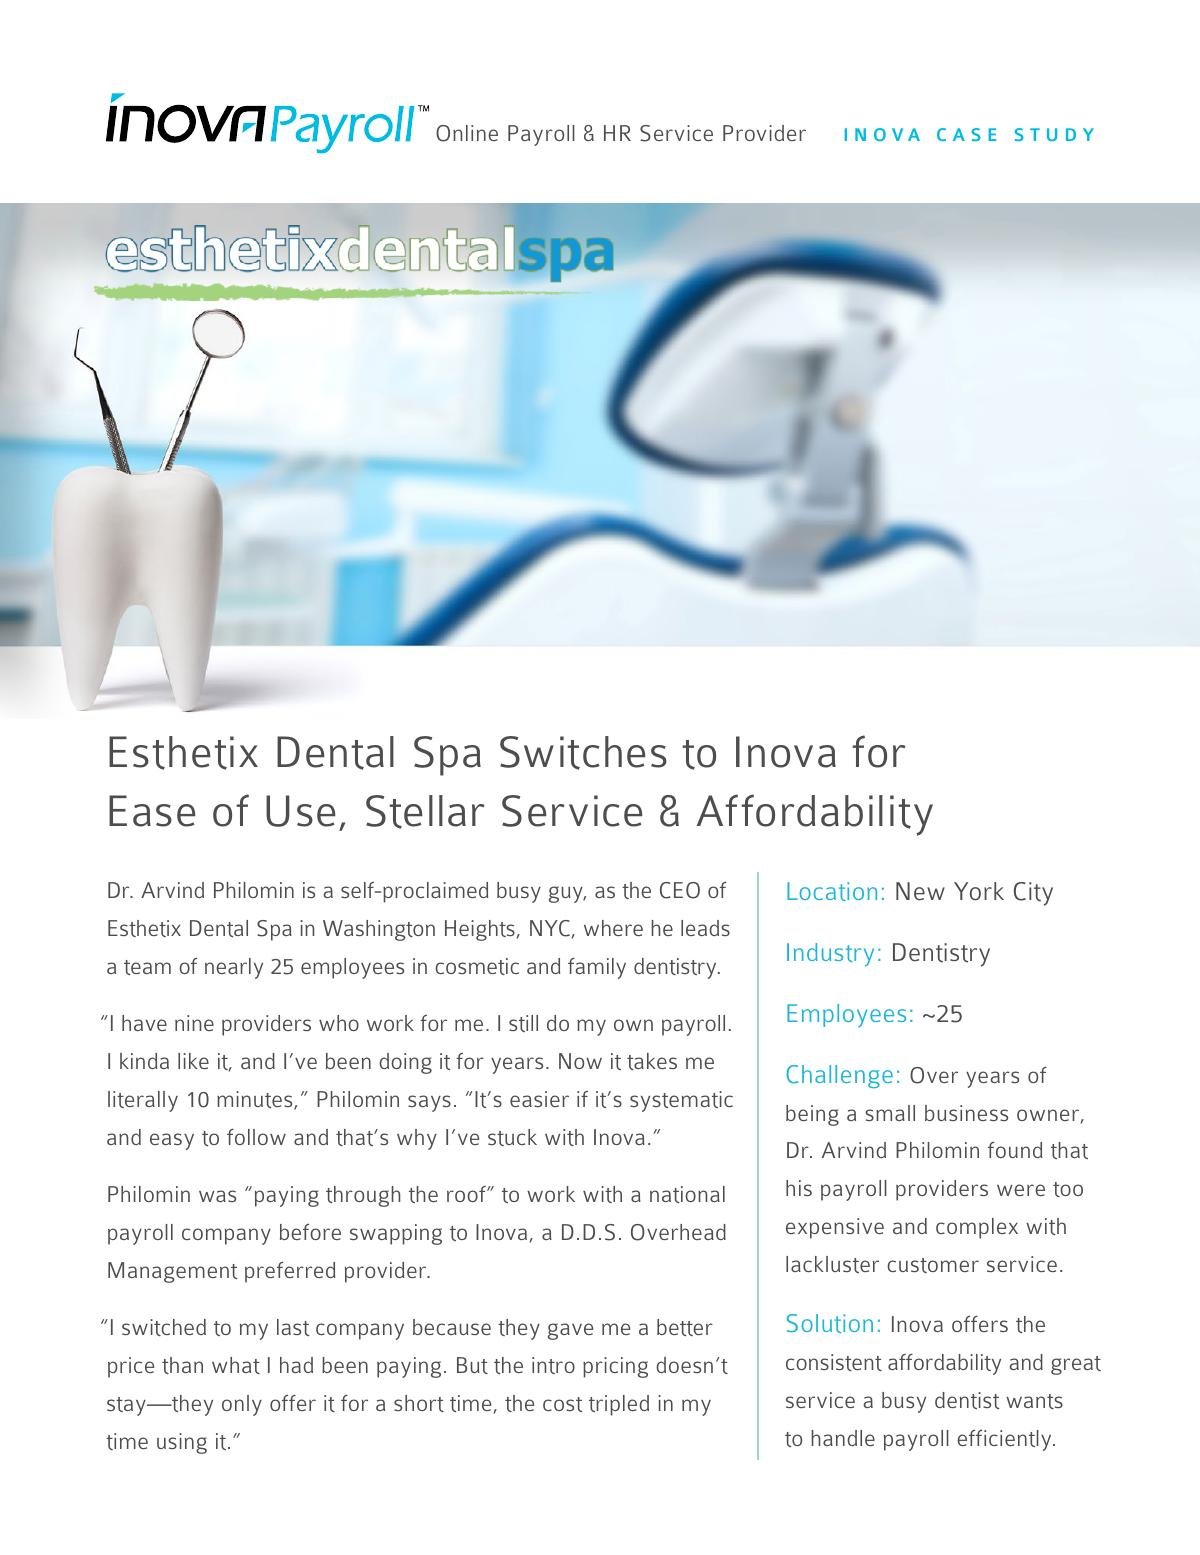 Esthetix Dental Spa Switches to Inova for Ease of Use, Stellar Service & Affordability